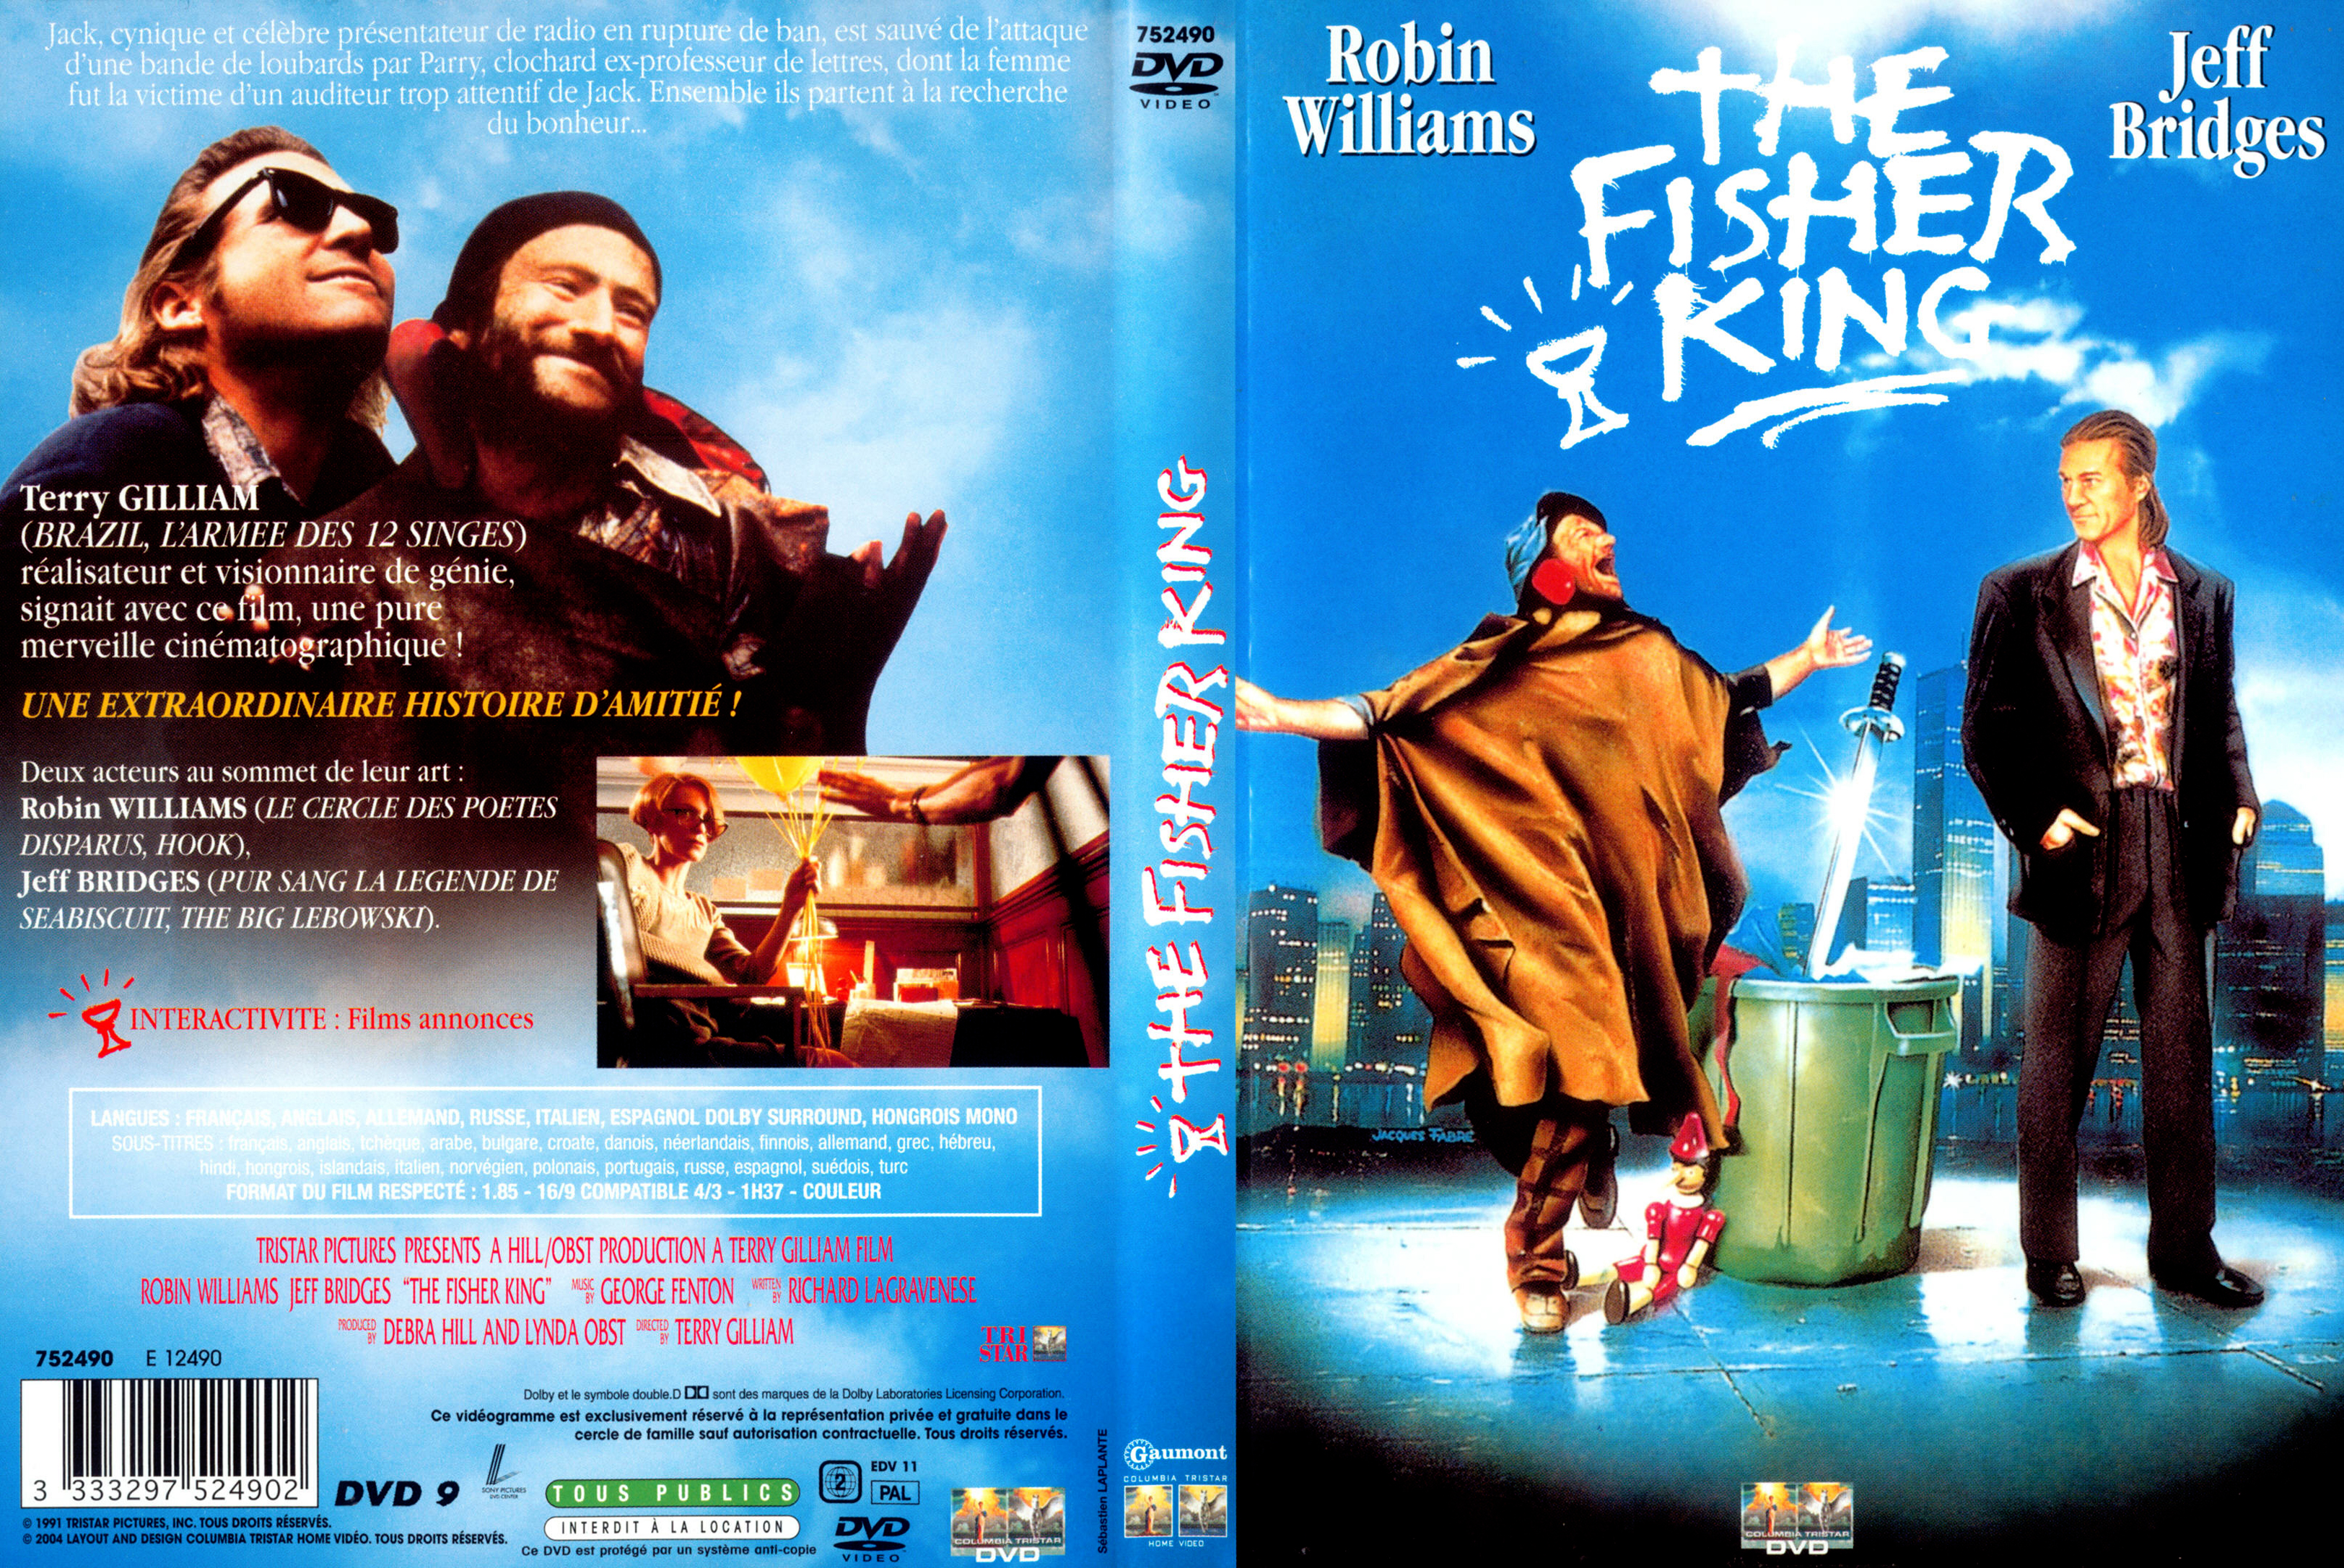 Jaquette DVD The fisher king